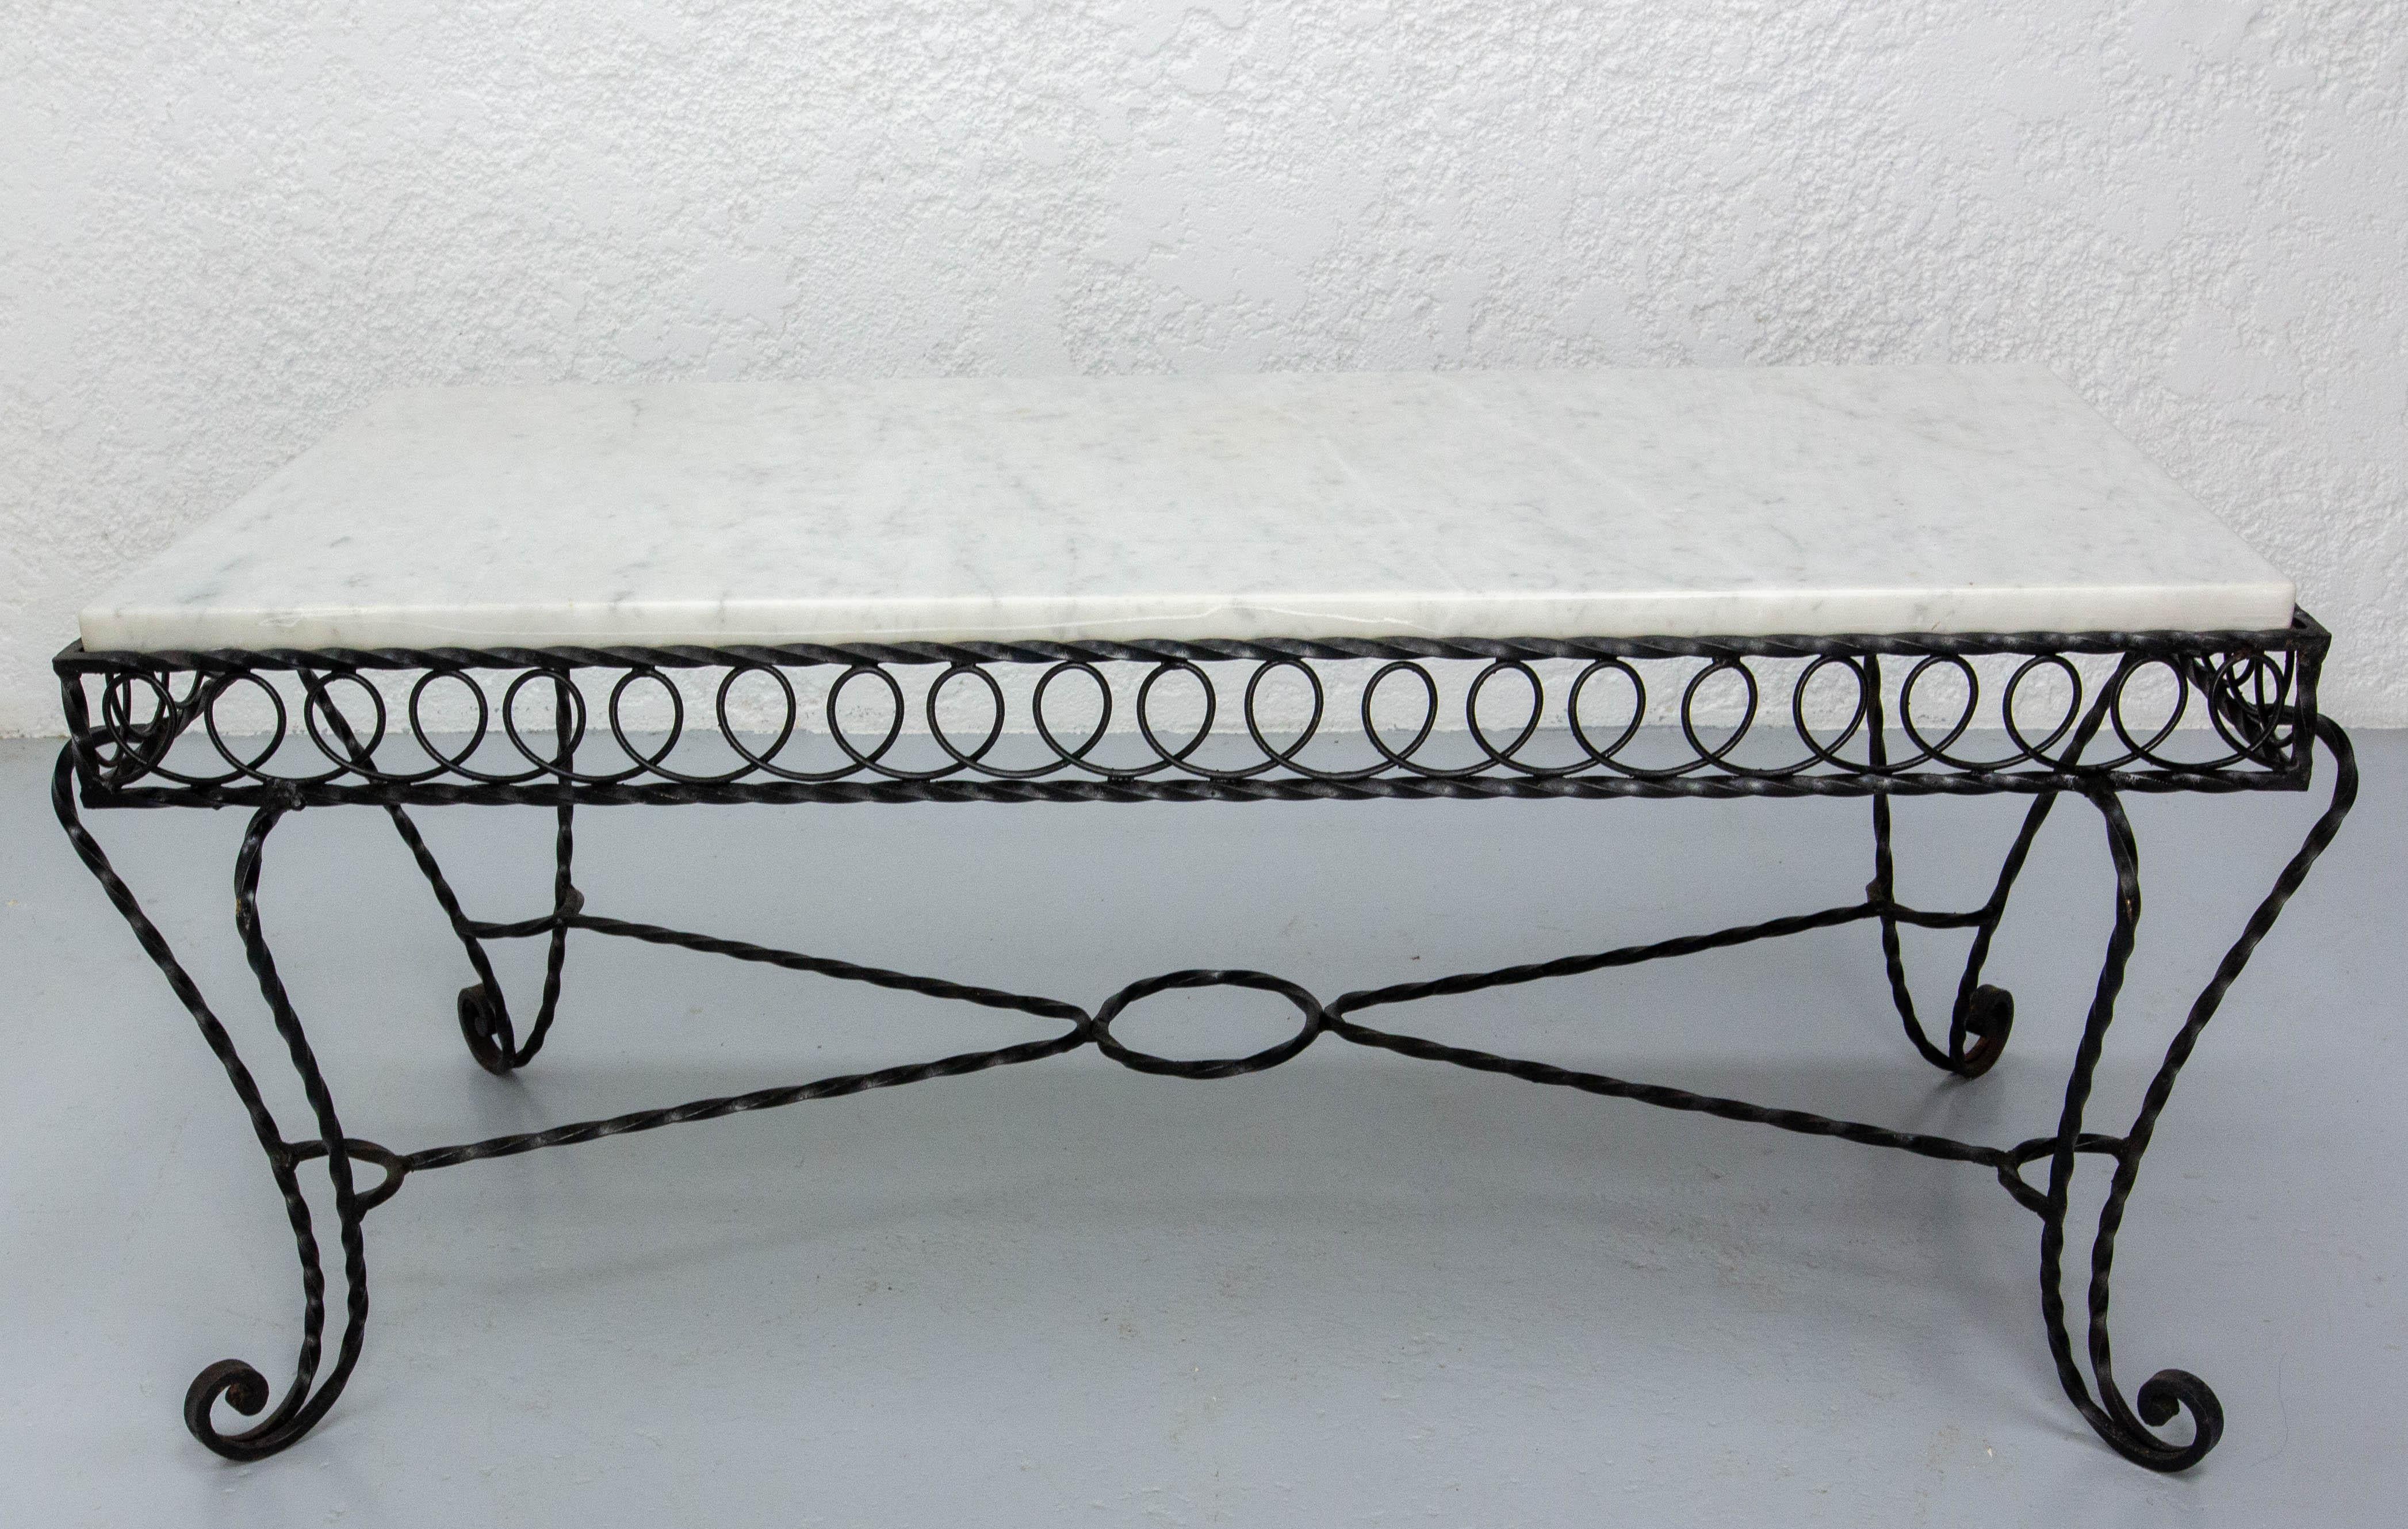 French marble top and wrought iron coffee table.
Delivred in two packs.
In good condition.

Shipping:
65 / 120 / 50 cm 43 kg